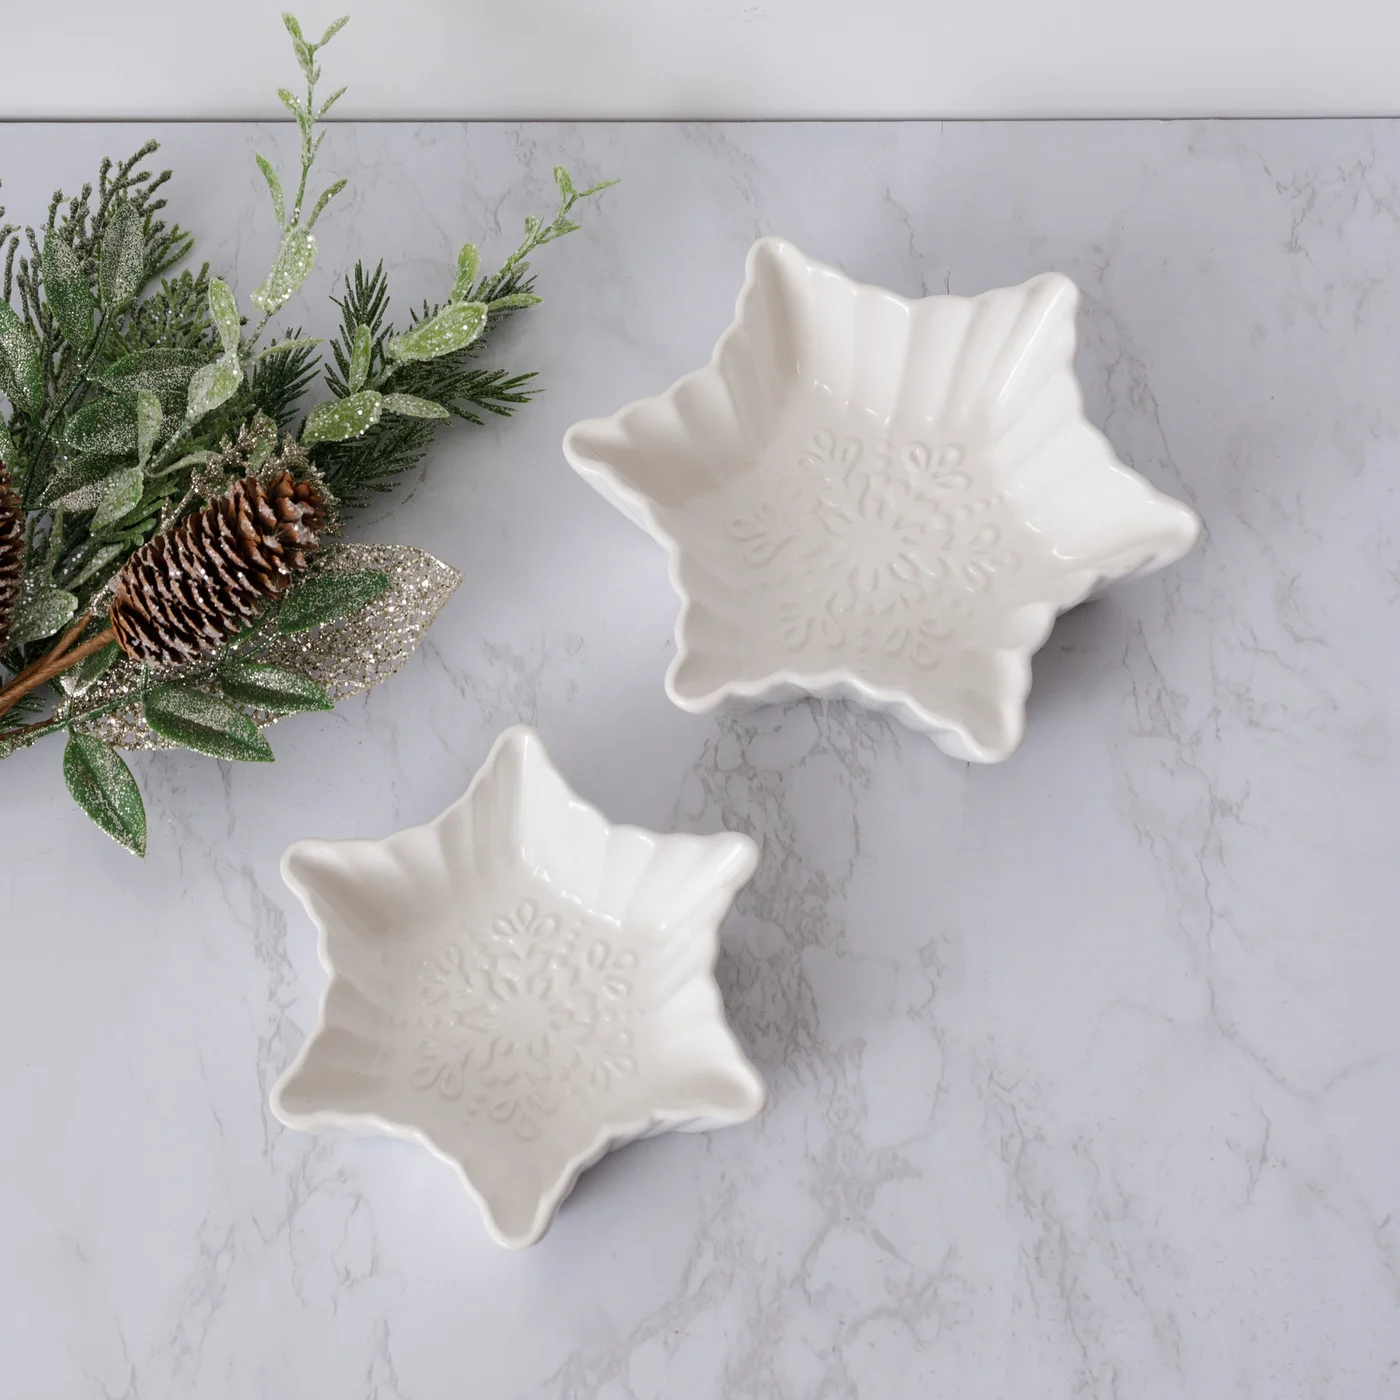 Set of 2 Snowflake Shaped Candy Dishes